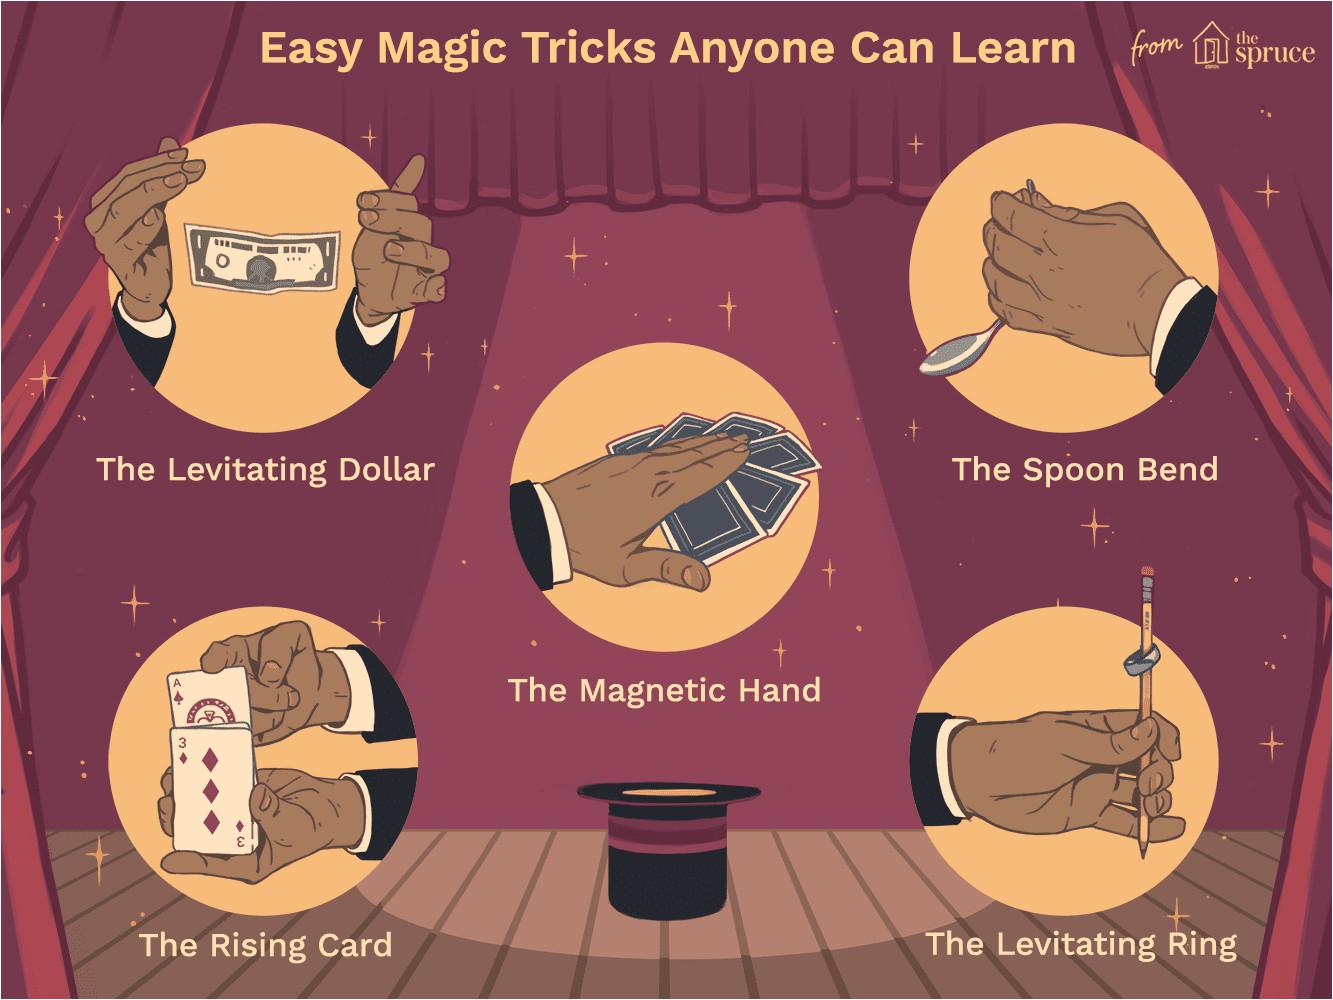 learn and perform easy magic tricks add 4121915 final 055a28bc695642e0a234b6c923f88261 png